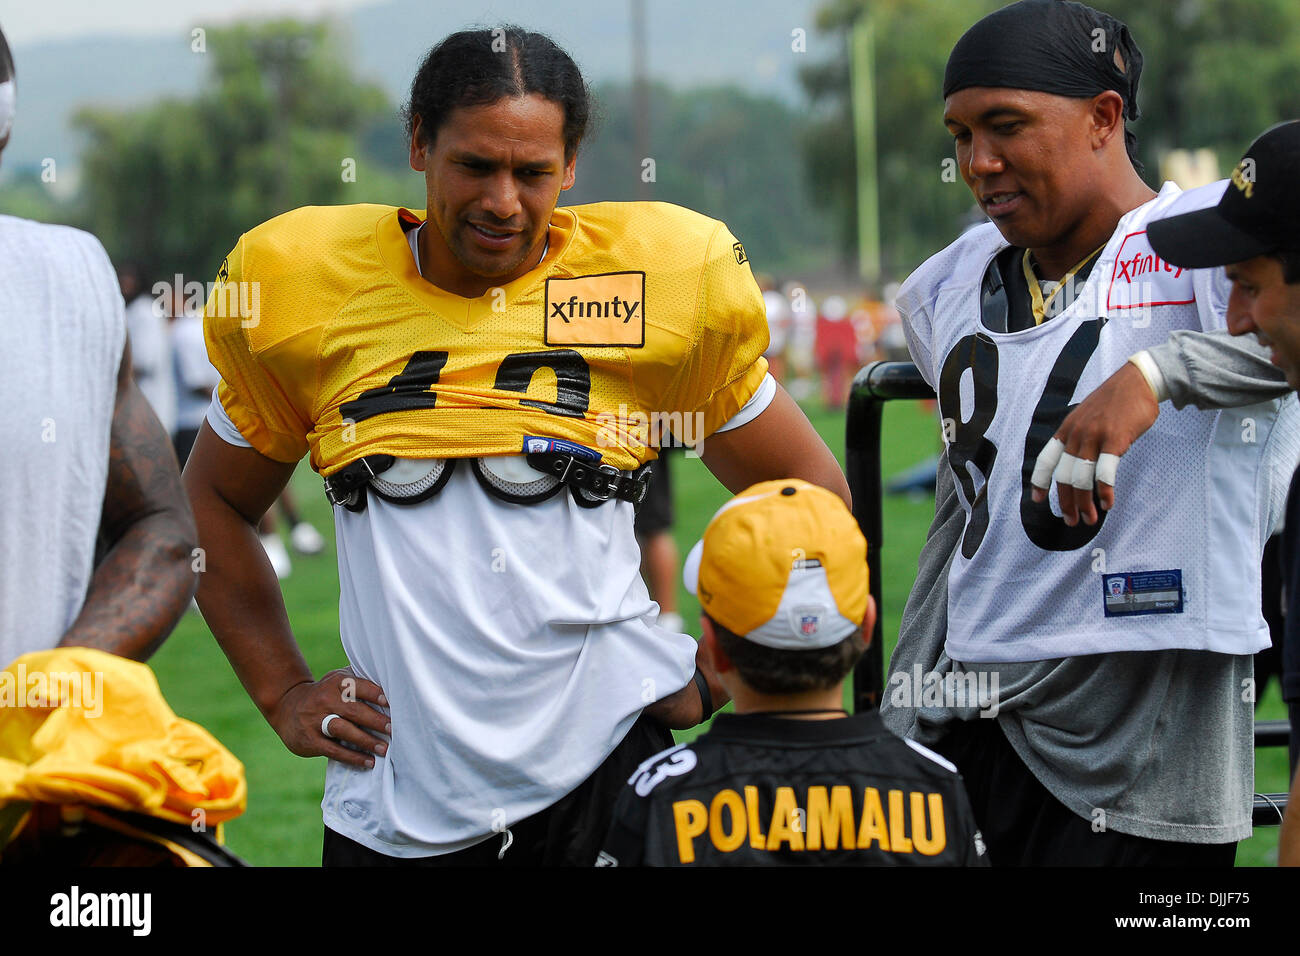 Aug. 11, 2010 - Latrobe, PENNSYLVANNIA, United States of America - 11 August, 2010: Pittsburgh Steelers' strong safety TROY POLAMALU (43) and Pittsburgh Steelers' wide receiver HINES WARD (86) talk with a young Steelers fan during training camp at St. Vincent College in Latrobe, PA...MANDATORY CREDIT: DEAN BEATTIE / SOUTHCREEK GLOBAL (Credit Image: © Southcreek Global/ZUMApress.com Stock Photo